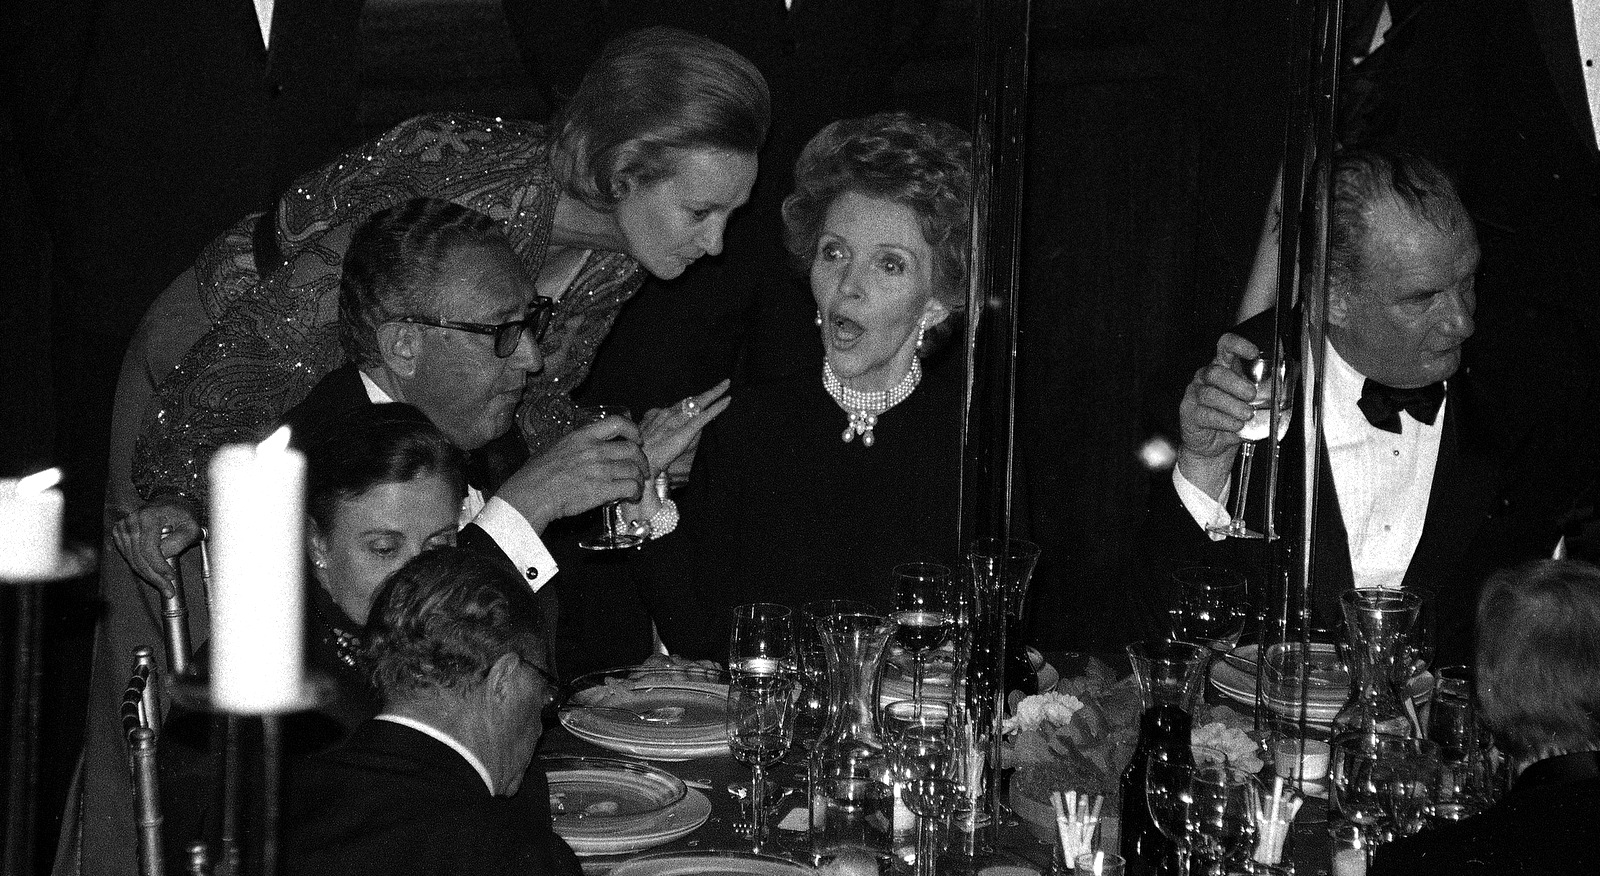 Washington Post publisher Katharine Graham, center, speaks with first lady Nancy Reagan, right, and former U.S. Secretary of State Henry Kissinger, during a gala celebrating the 50th anniversary of Newsweek magazine, Feb. 7, 1983, in New York. (AP/Ray Stubblebine)